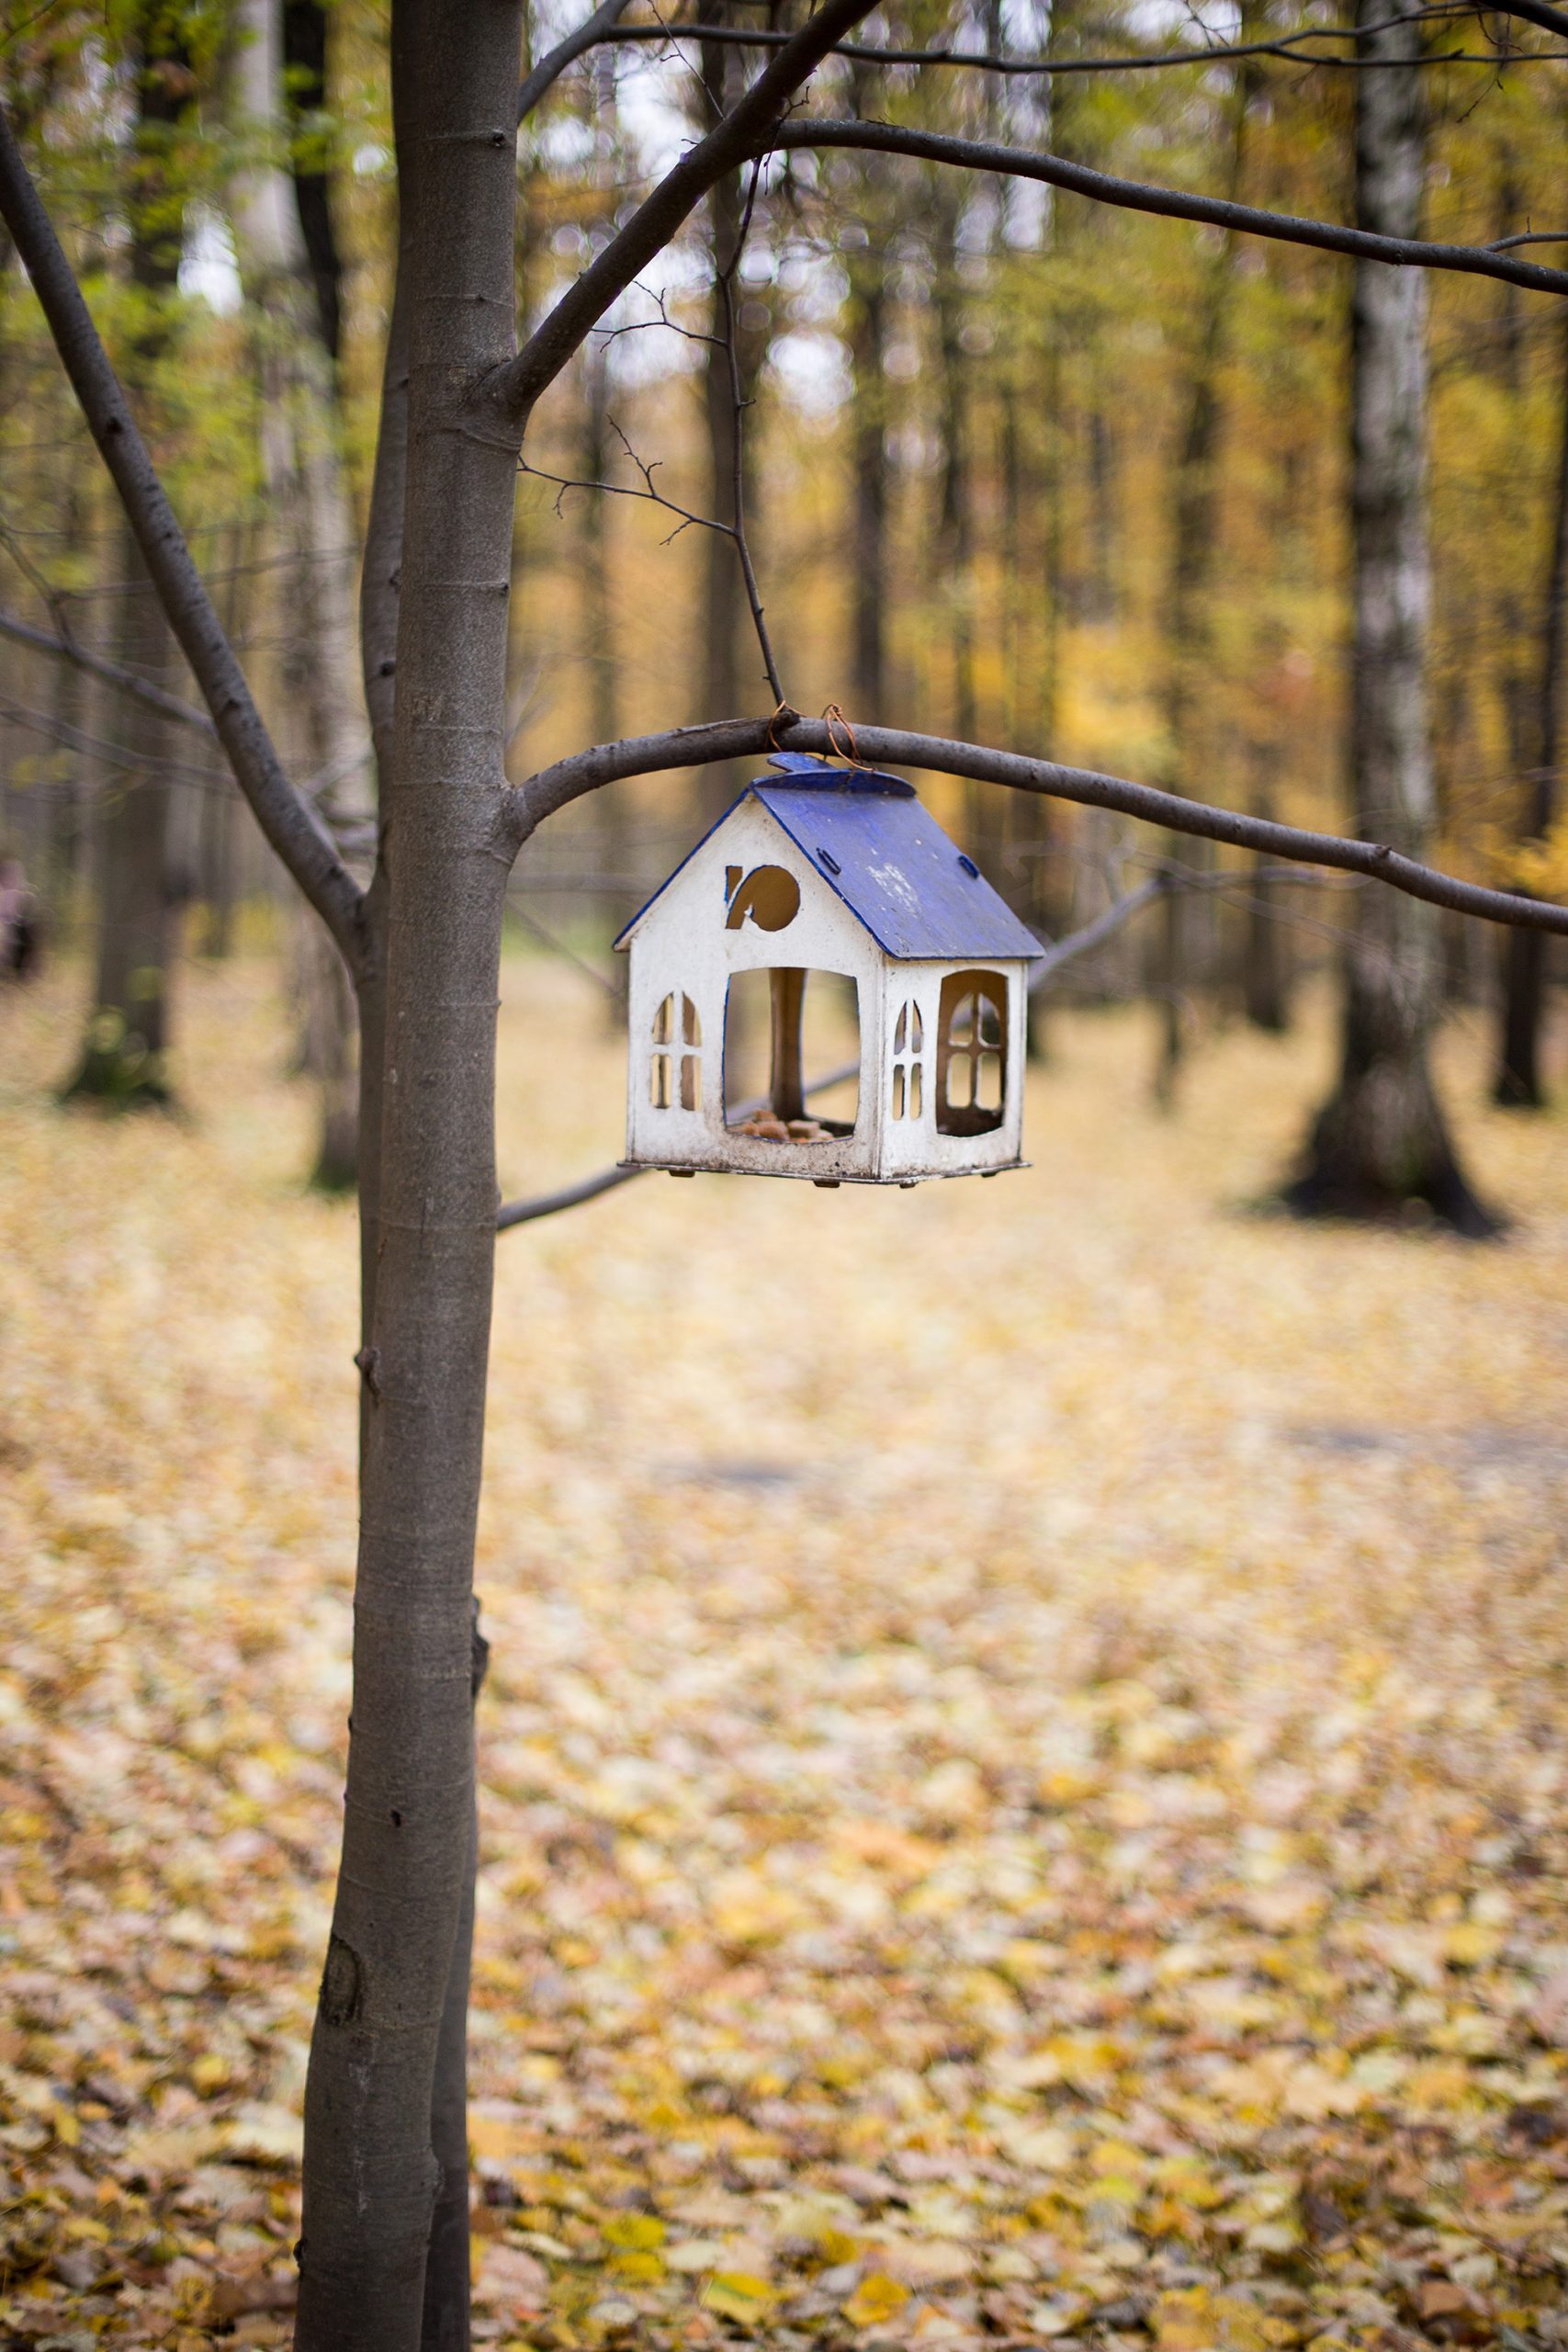 What's the best color for a bird feeder?